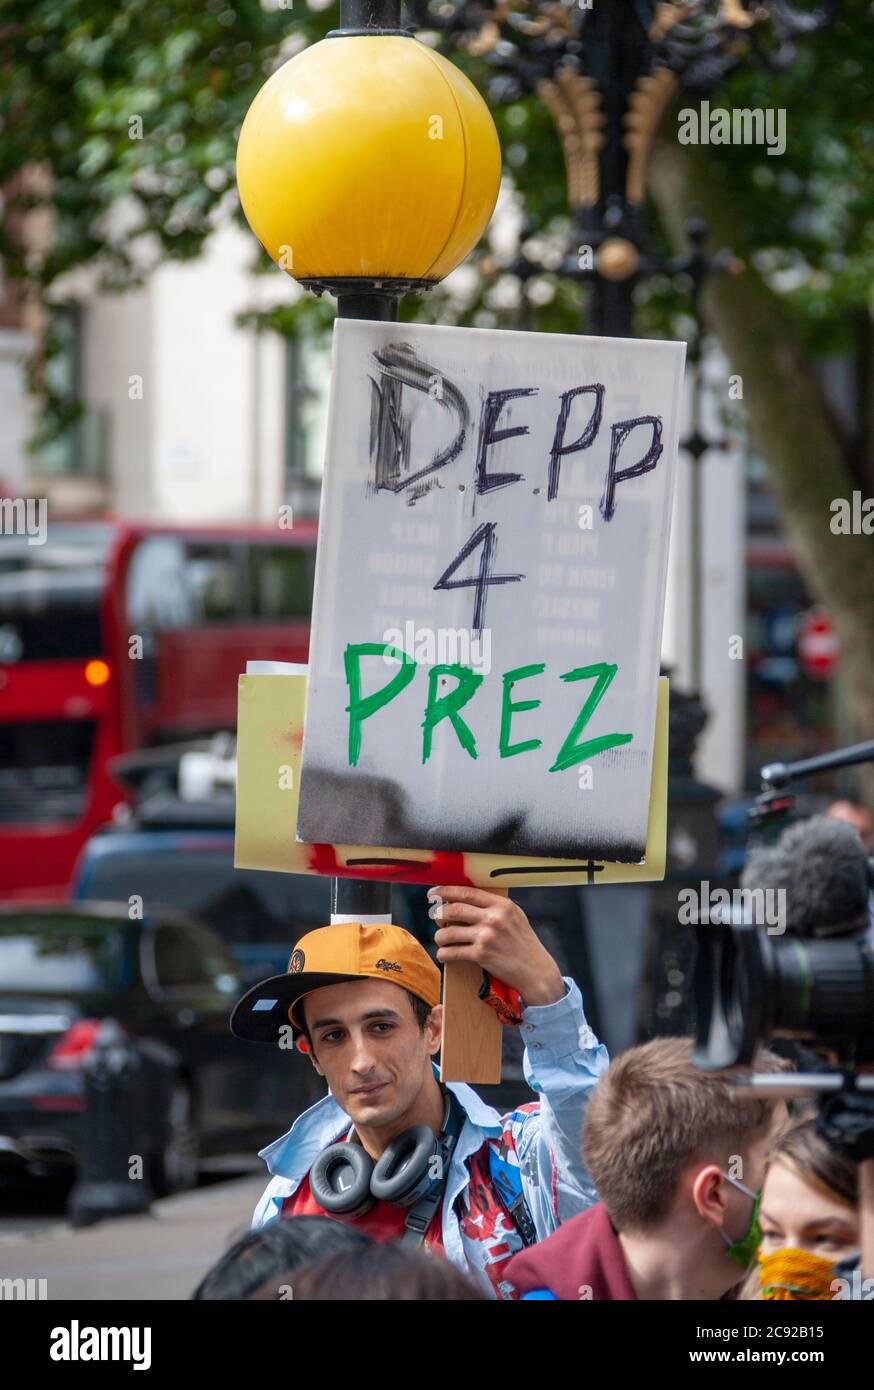 London, UK. 28th July 2020. Johnny Depp fan, Michael G. Smith, holds up a sign that reads ‘Depp 4 Prez’ as he awaits the arrival of Johnny Depp at the High Court, for day 16 of the actors libel trial against The Sun's publishers NGN. Credit: Neil Atkinson/Alamy Live News Stock Photo